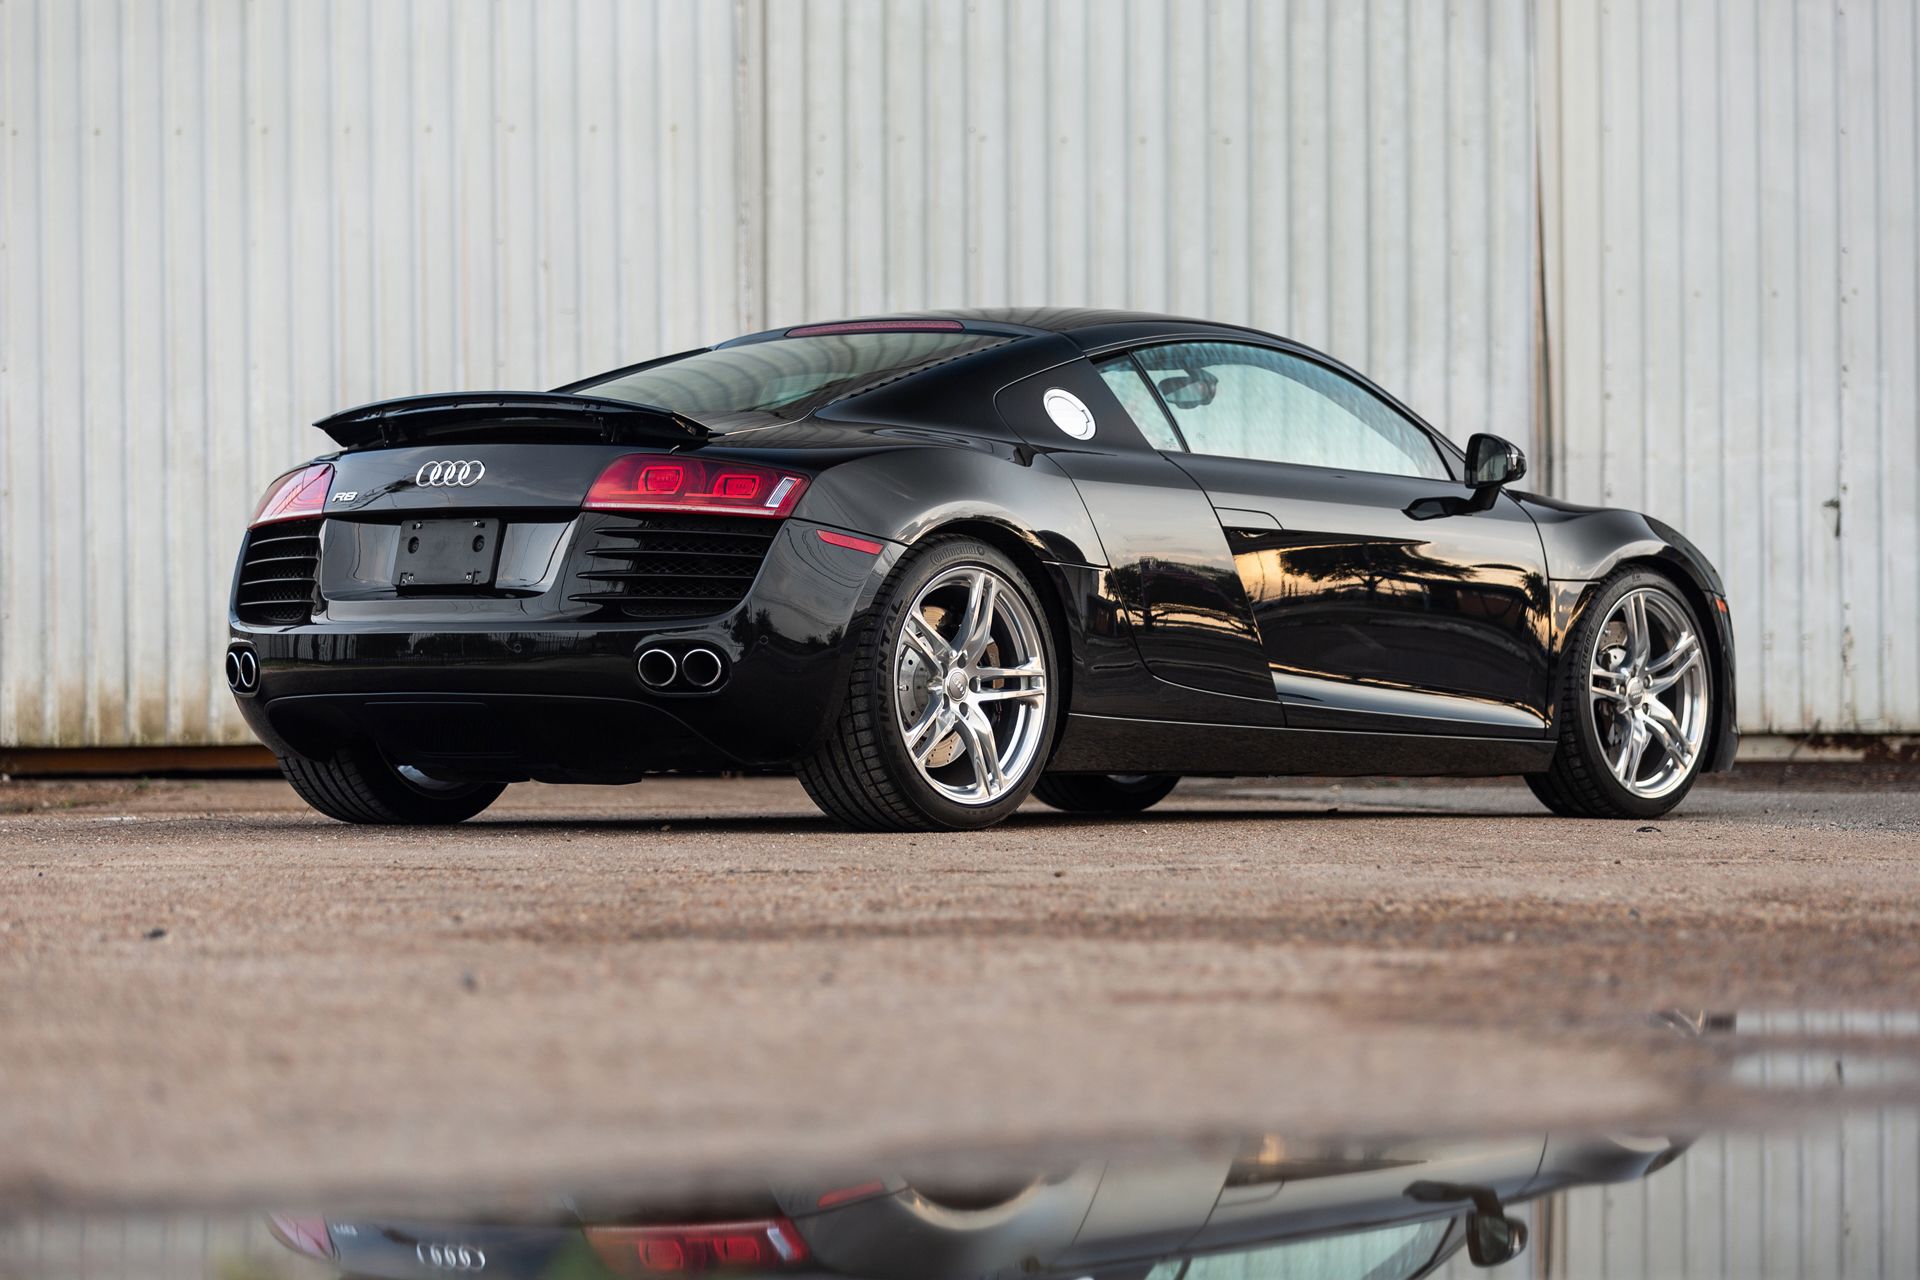 2009 Audi R8 4.2 Is Our Bring a Trailer Auction Pick of the Day